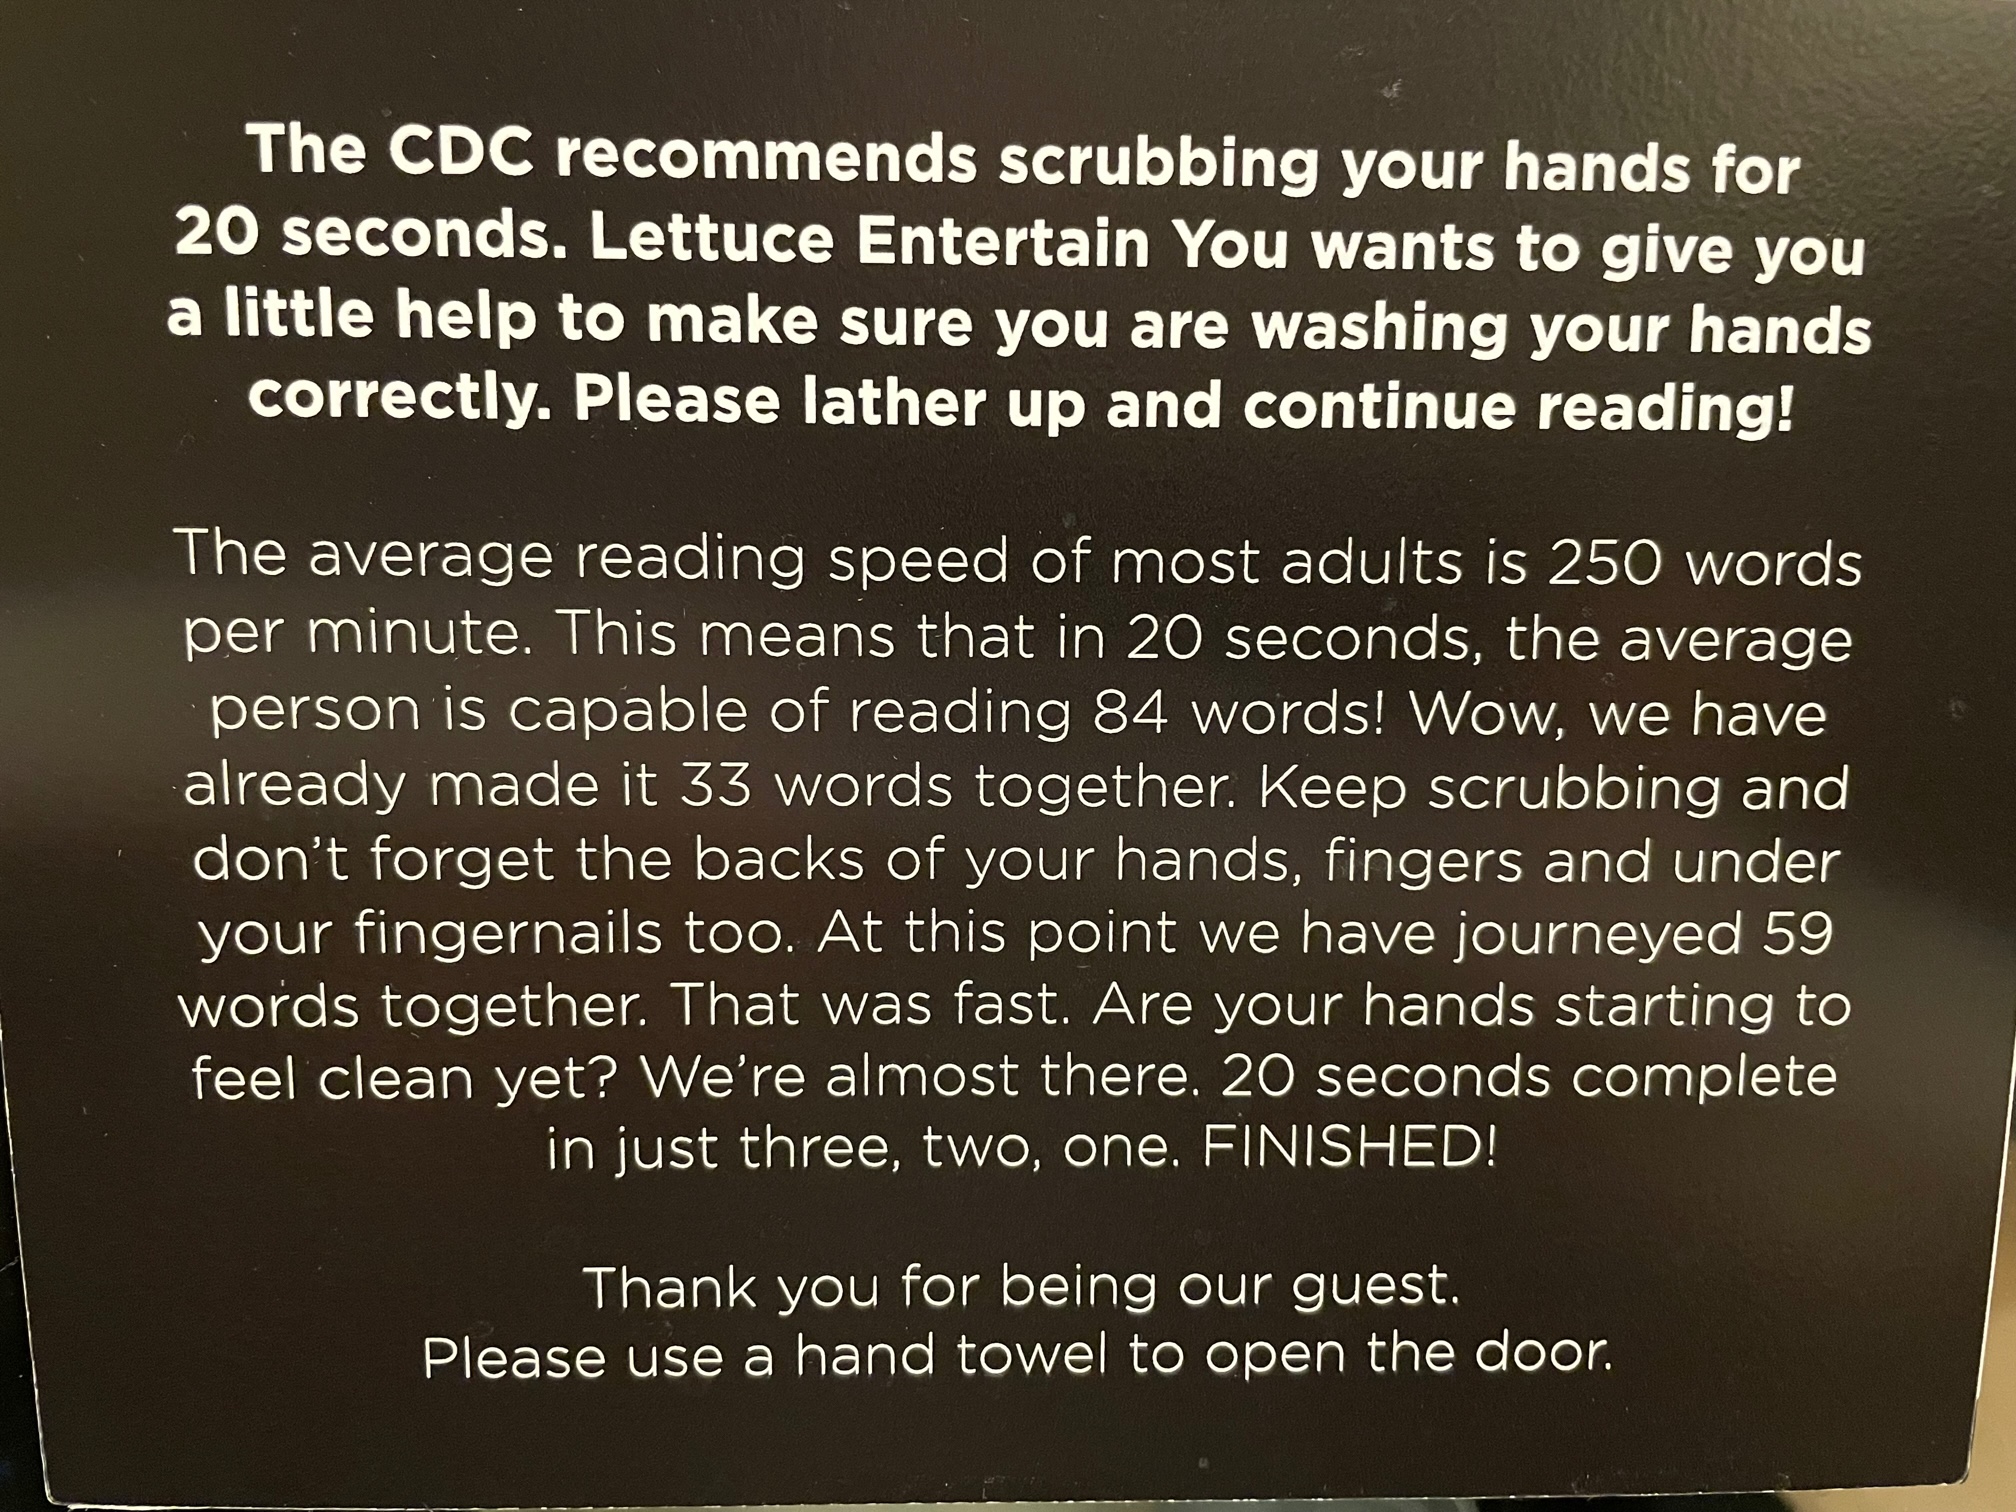 A lengthy sign about hand washing that takes the requisite 20 seconds of washing to be able to read in full. This creates a memorable bathroom experience while also ensuring fully clean hands.